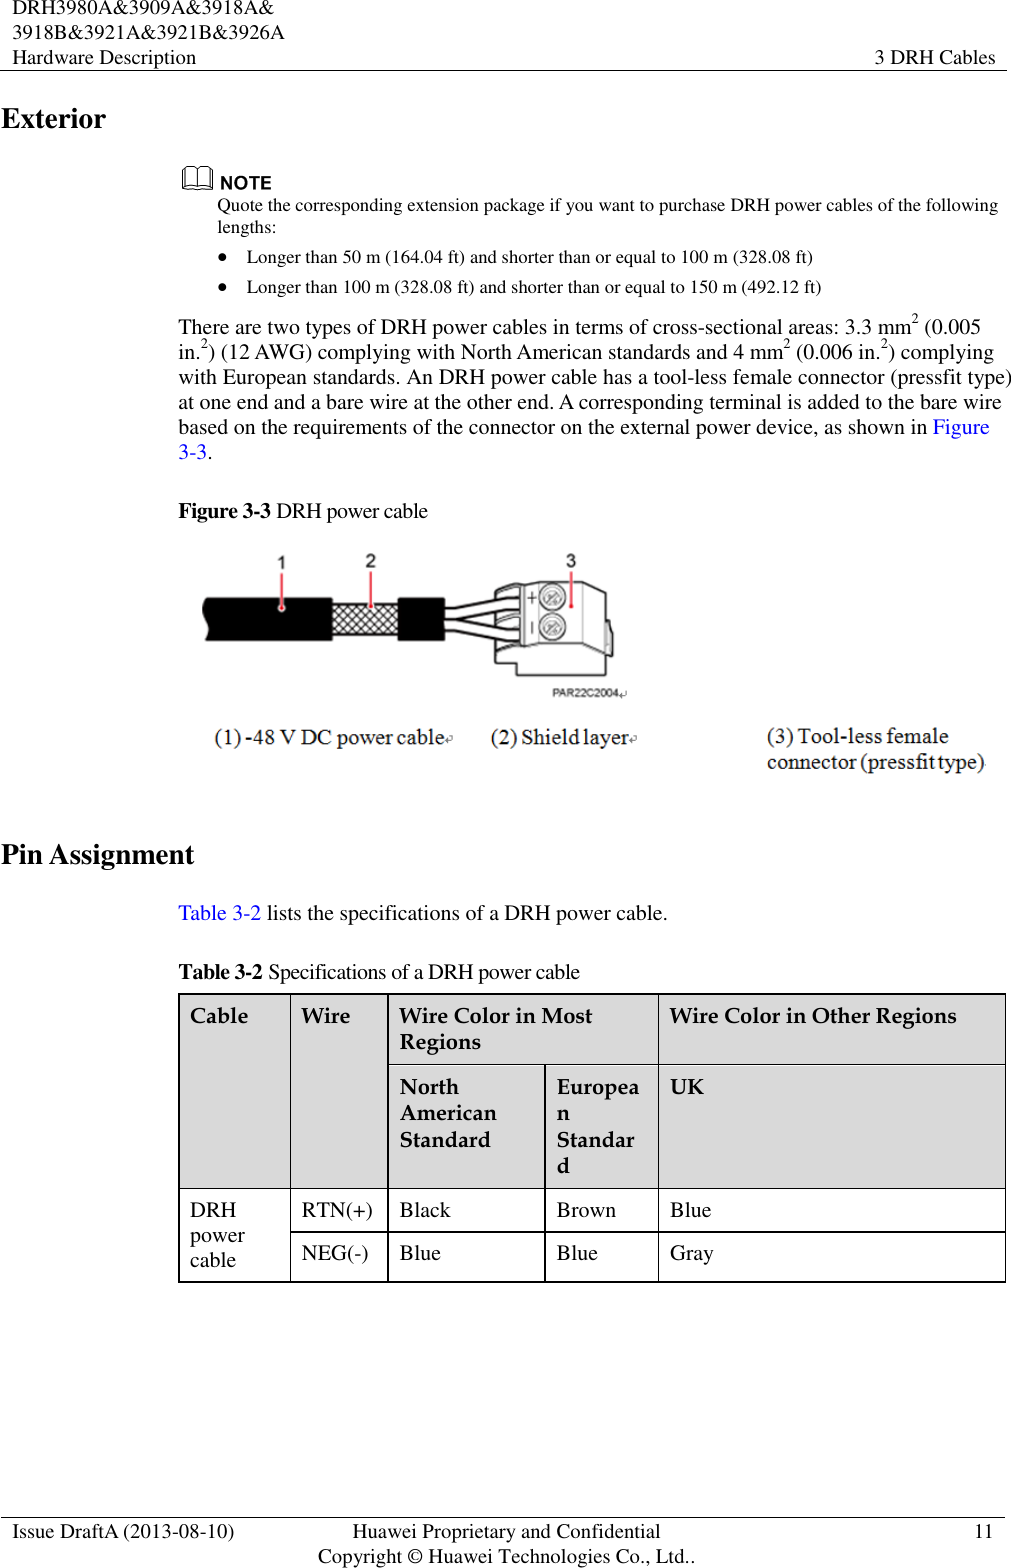  DRH3980A&amp;3909A&amp;3918A&amp; 3918B&amp;3921A&amp;3921B&amp;3926A Hardware Description   3 DRH Cables  Issue DraftA (2013-08-10) Huawei Proprietary and Confidential                                     Copyright © Huawei Technologies Co., Ltd.. 11    Exterior  Quote the corresponding extension package if you want to purchase DRH power cables of the following lengths:  Longer than 50 m (164.04 ft) and shorter than or equal to 100 m (328.08 ft)  Longer than 100 m (328.08 ft) and shorter than or equal to 150 m (492.12 ft) There are two types of DRH power cables in terms of cross-sectional areas: 3.3 mm2 (0.005 in.2) (12 AWG) complying with North American standards and 4 mm2 (0.006 in.2) complying with European standards. An DRH power cable has a tool-less female connector (pressfit type) at one end and a bare wire at the other end. A corresponding terminal is added to the bare wire based on the requirements of the connector on the external power device, as shown in Figure 3-3. Figure 3-3 DRH power cable  Pin Assignment Table 3-2 lists the specifications of a DRH power cable. Table 3-2 Specifications of a DRH power cable Cable Wire Wire Color in Most Regions Wire Color in Other Regions North American Standard European Standard UK DRH power cable RTN(+) Black Brown Blue NEG(-) Blue Blue Gray  